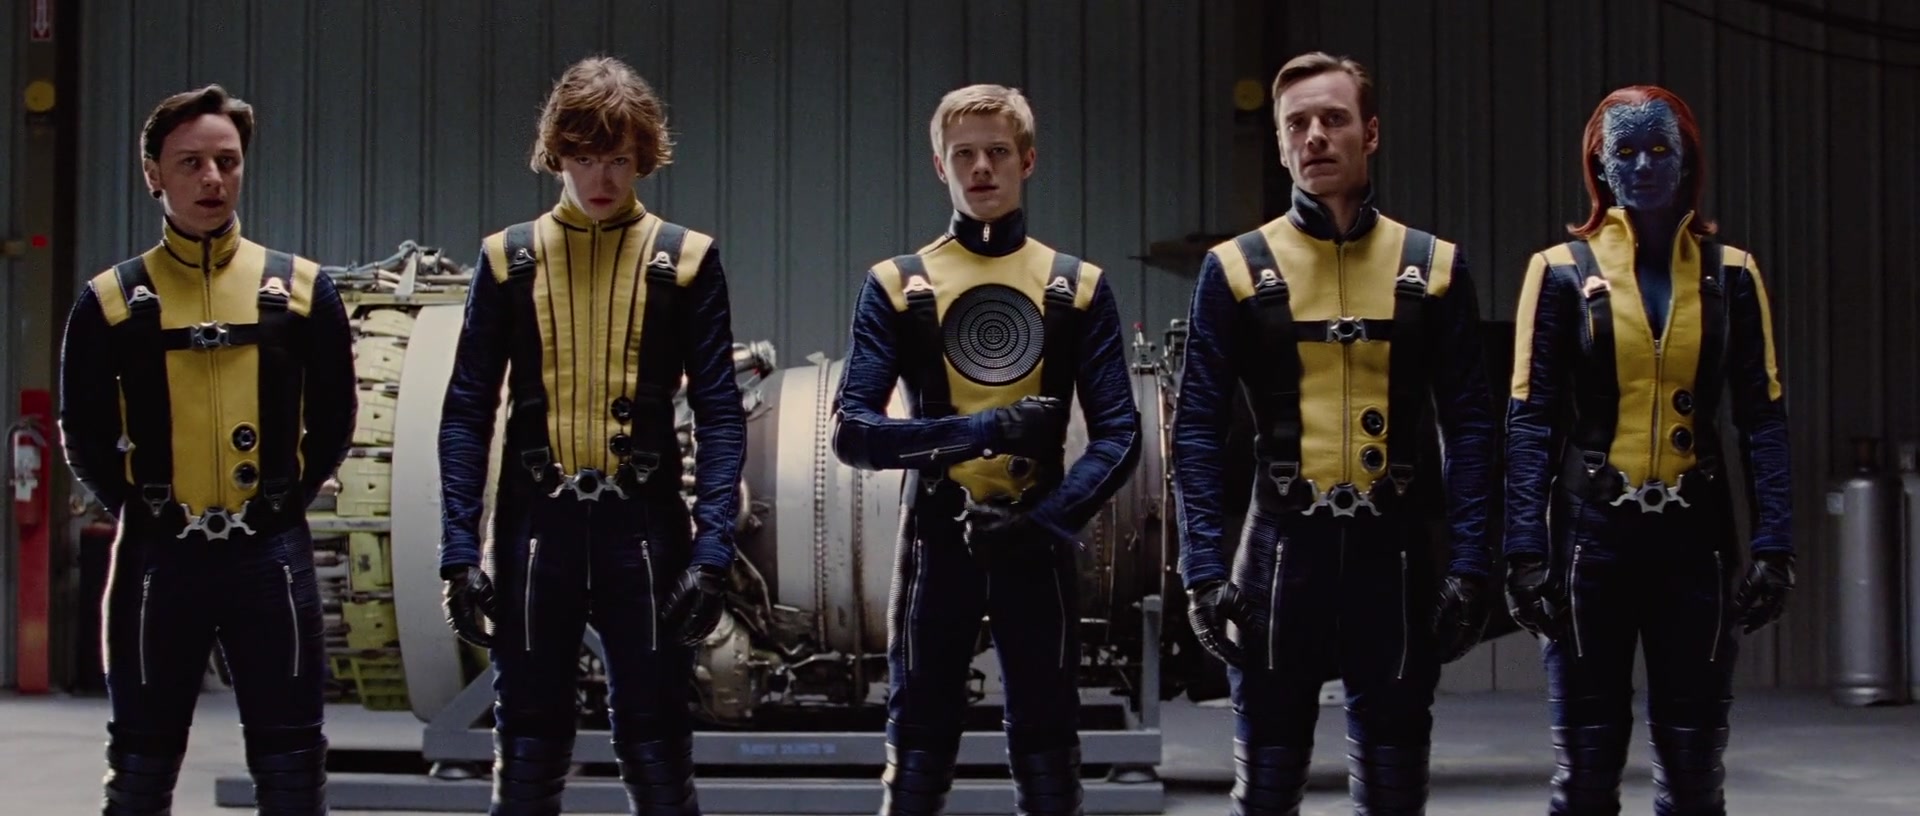 The eponymous First Class prepares for their first and final mission in X-Men: First Class (2011), Marvel Entertainment